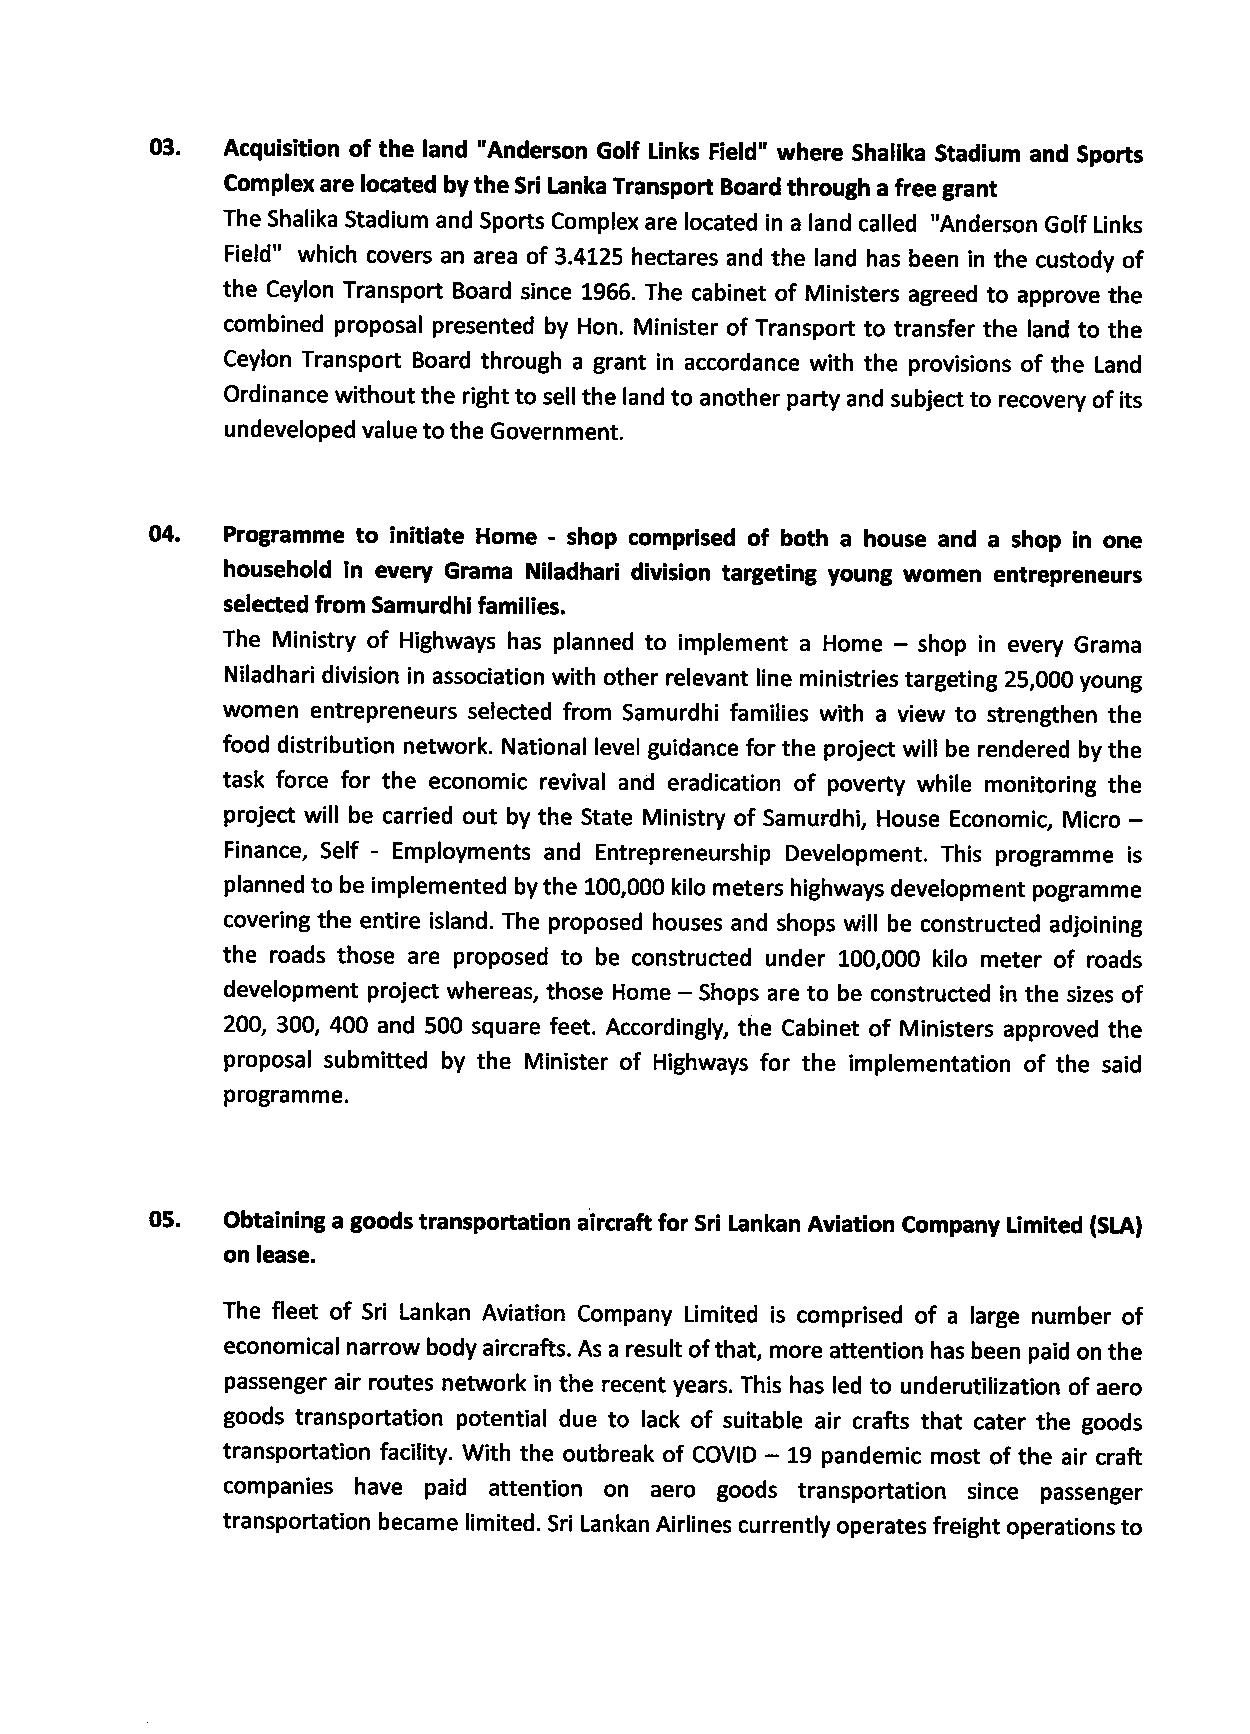 Cabinet Decision on 15.03.2021 English page 002